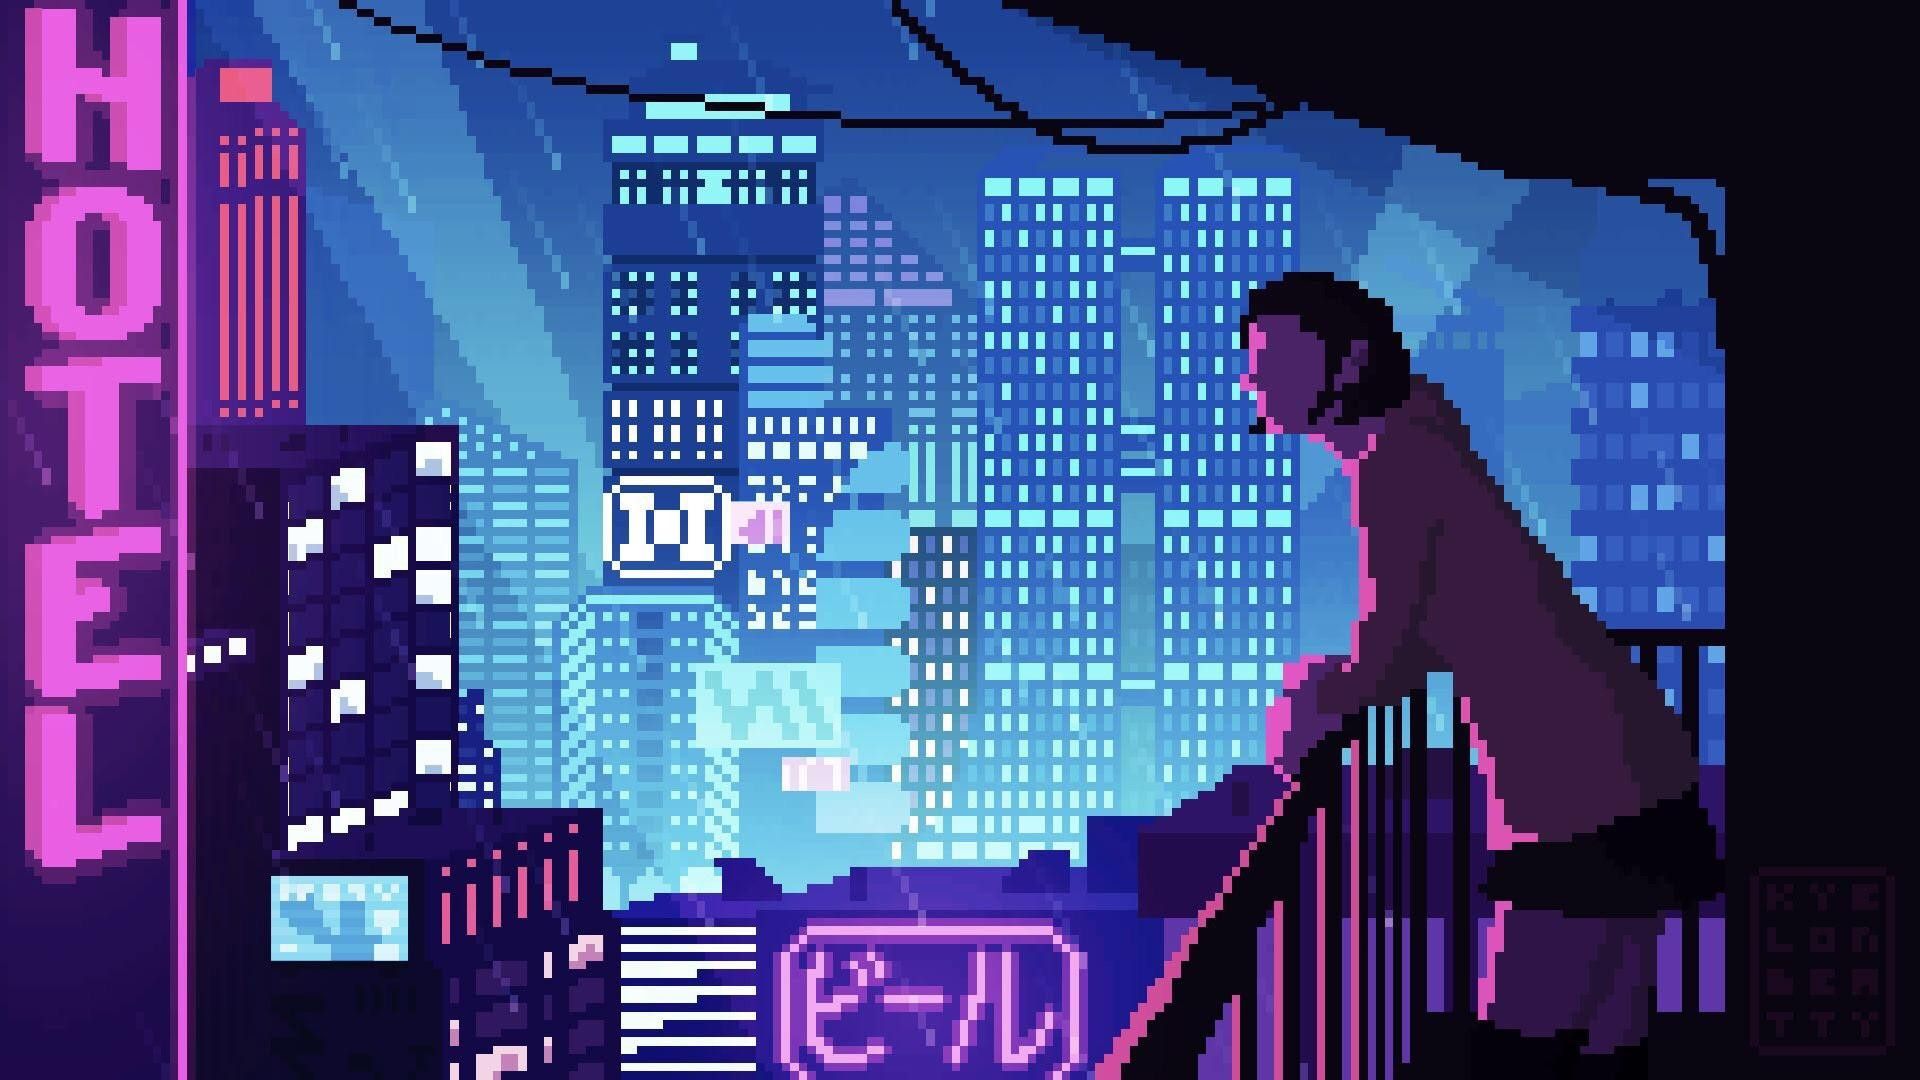 A pixelated image of a man standing on a balcony looking out over a city at night - Cyberpunk